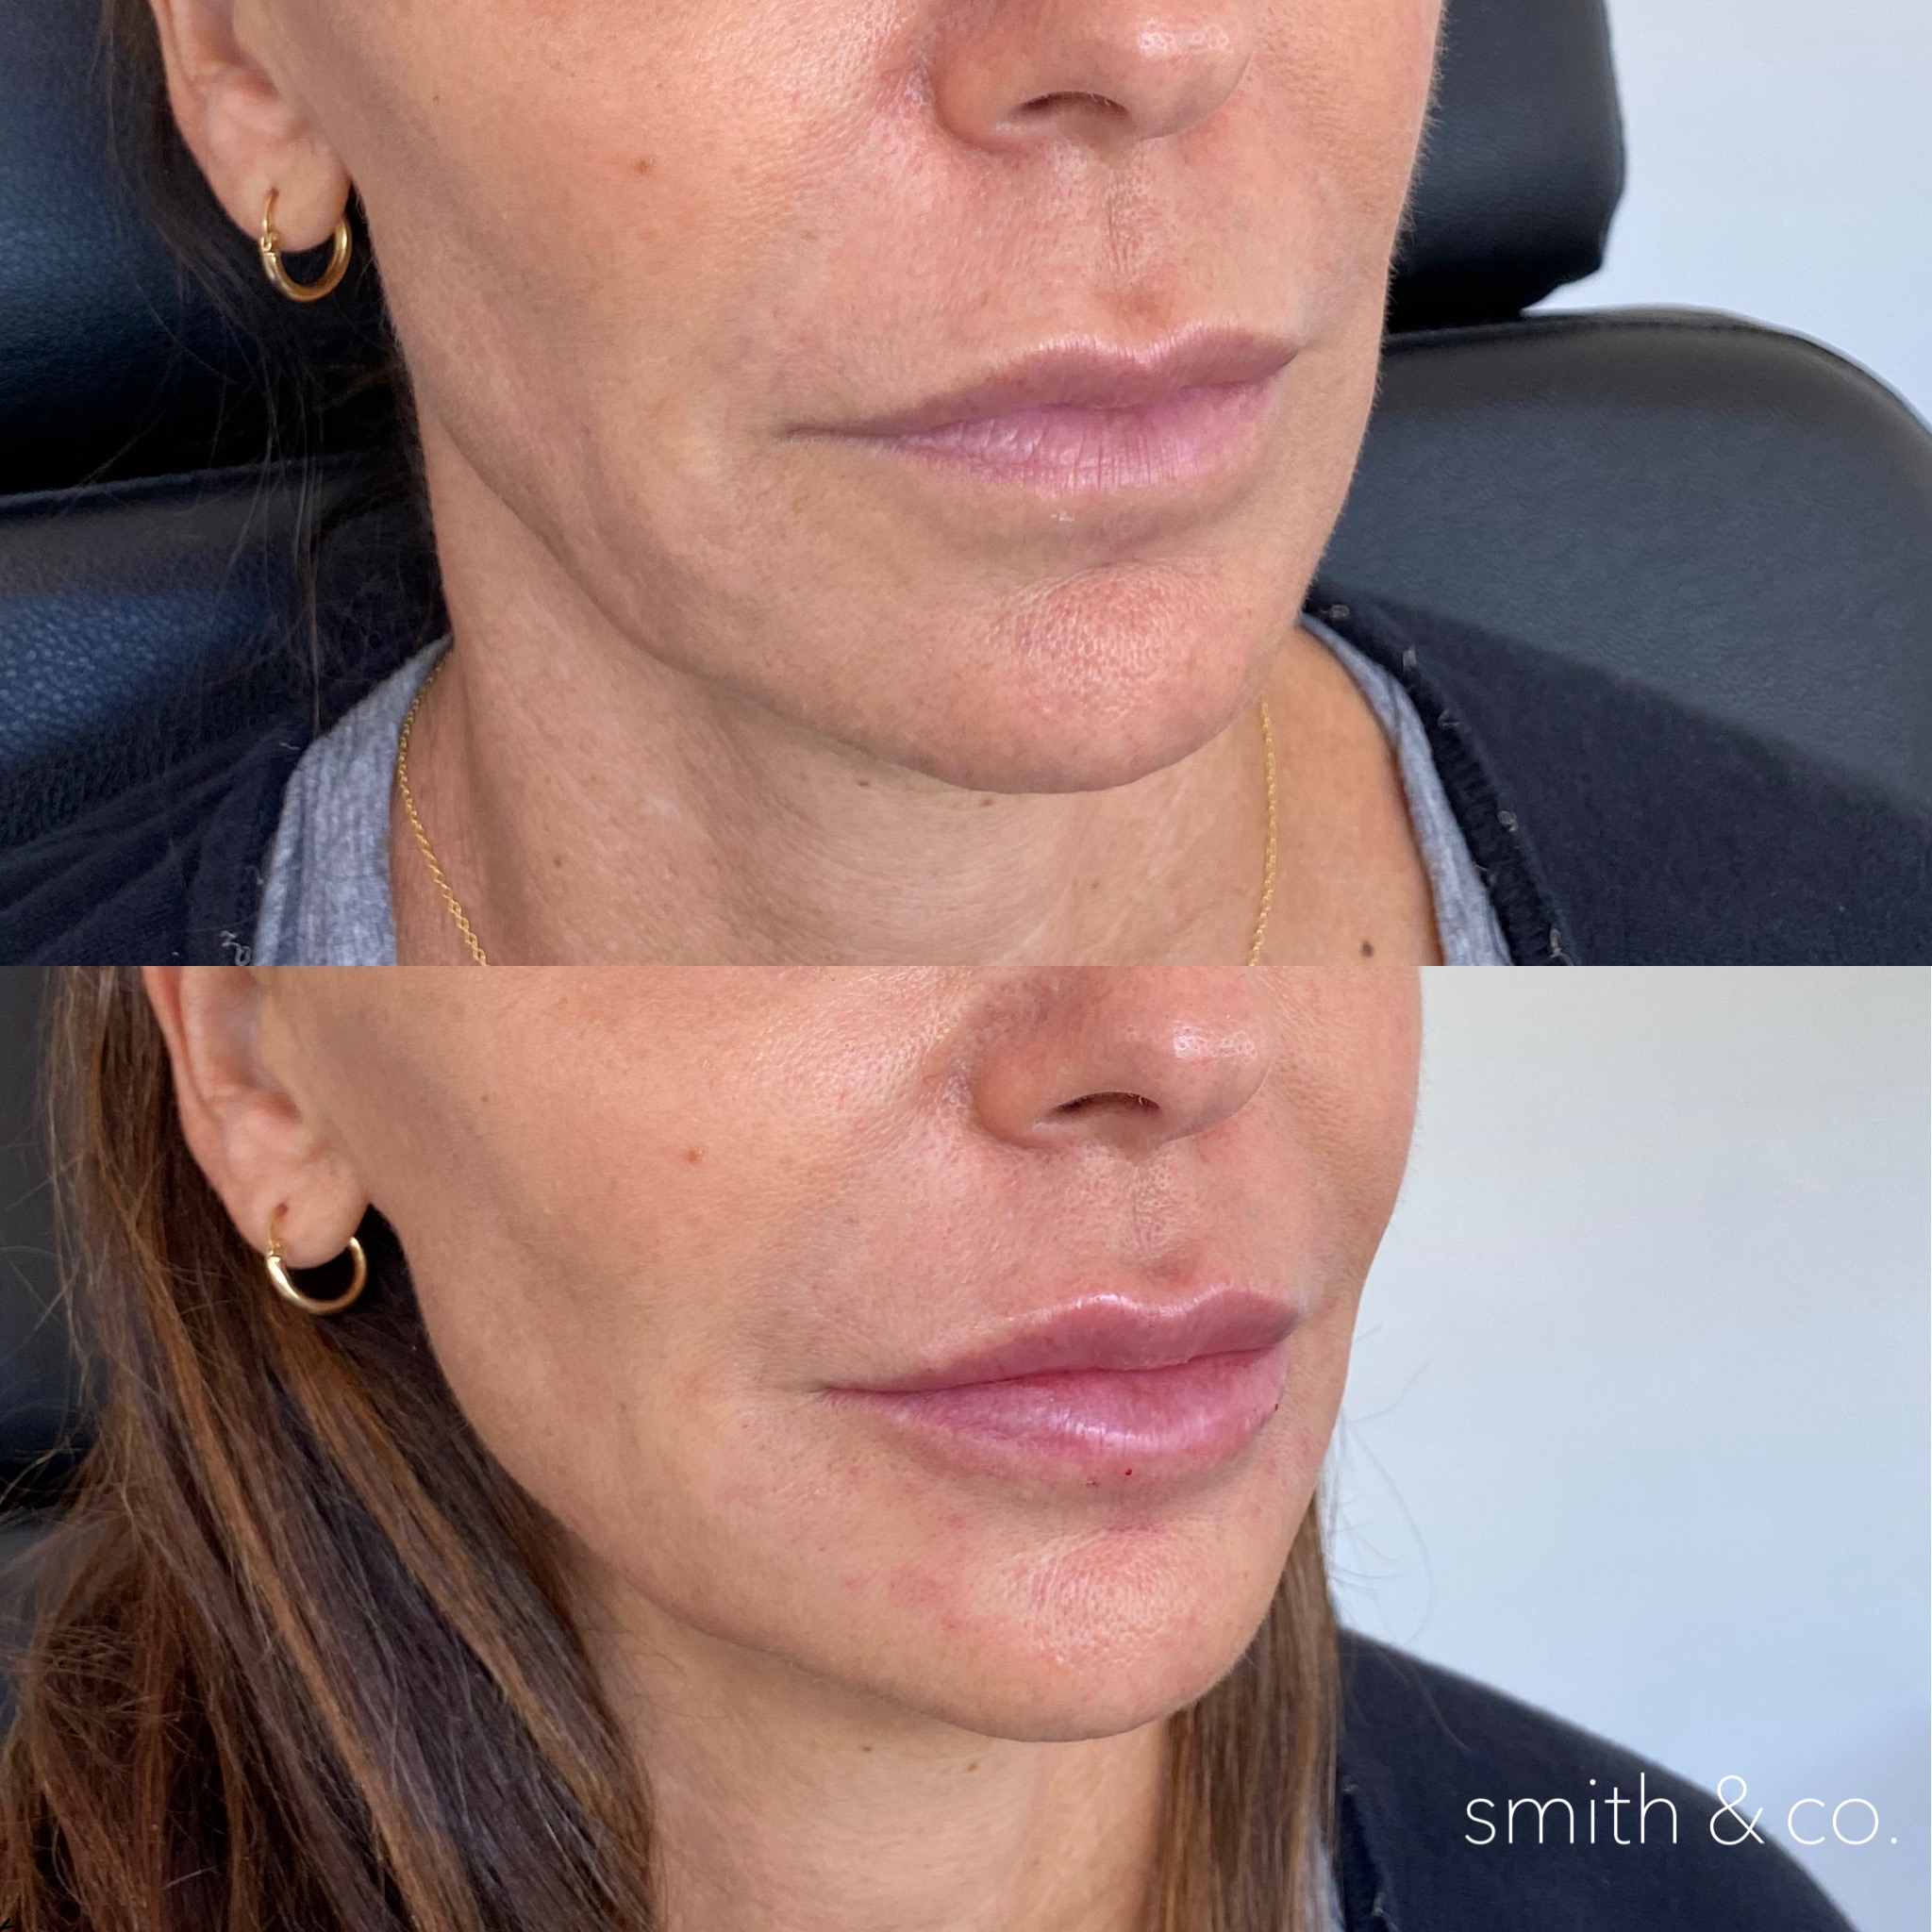 smith & co best lip fillers and PDO threads in miami_5486.PNG